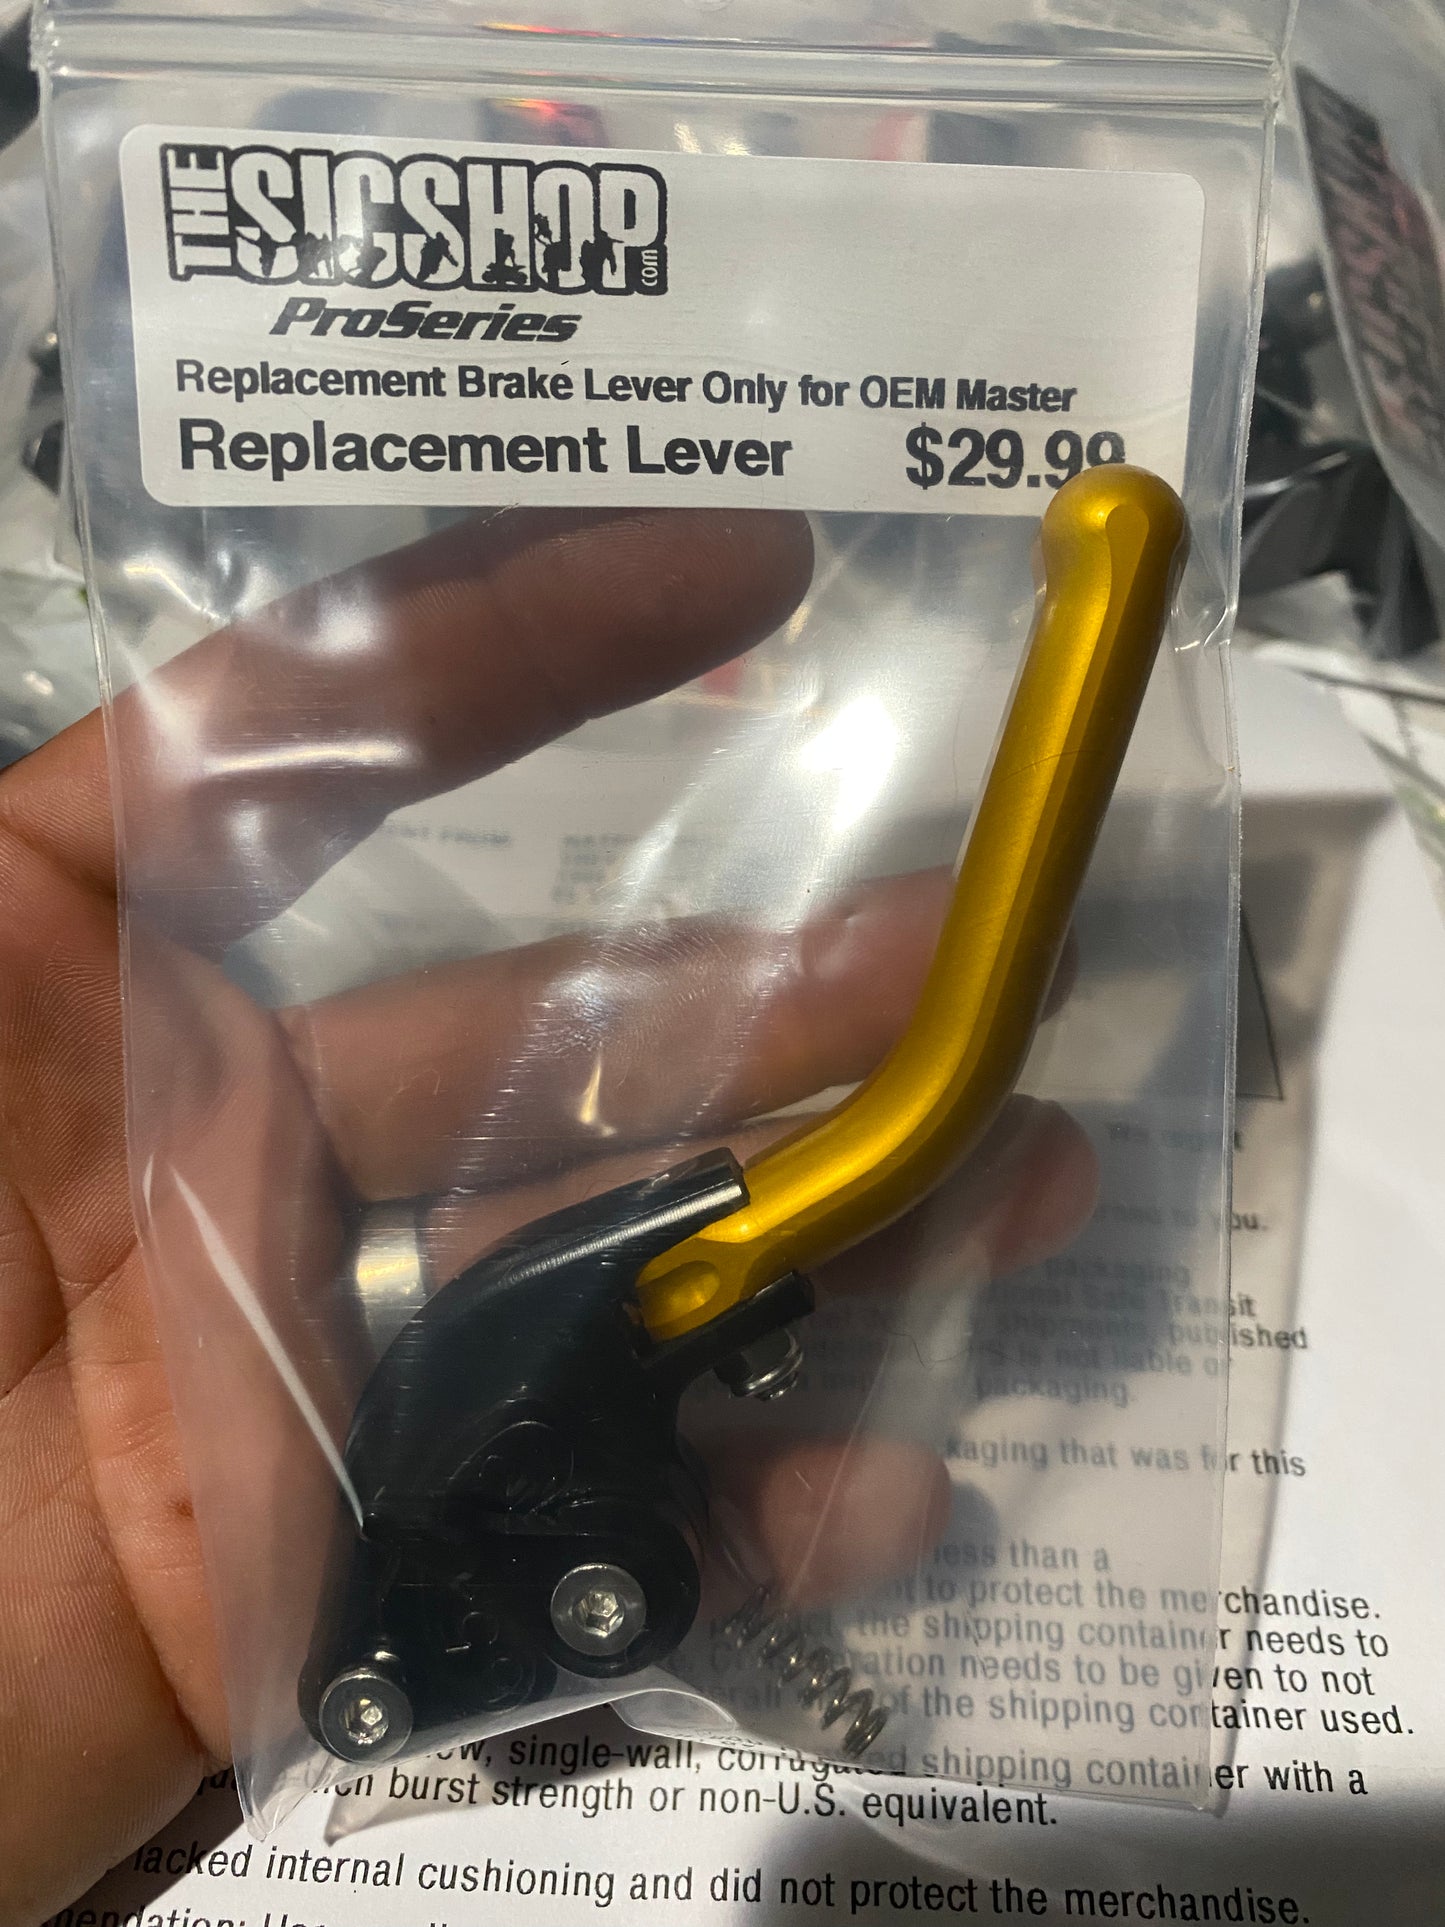 Matching Brake Lever *Replacement Lever Only* for OEM Masters